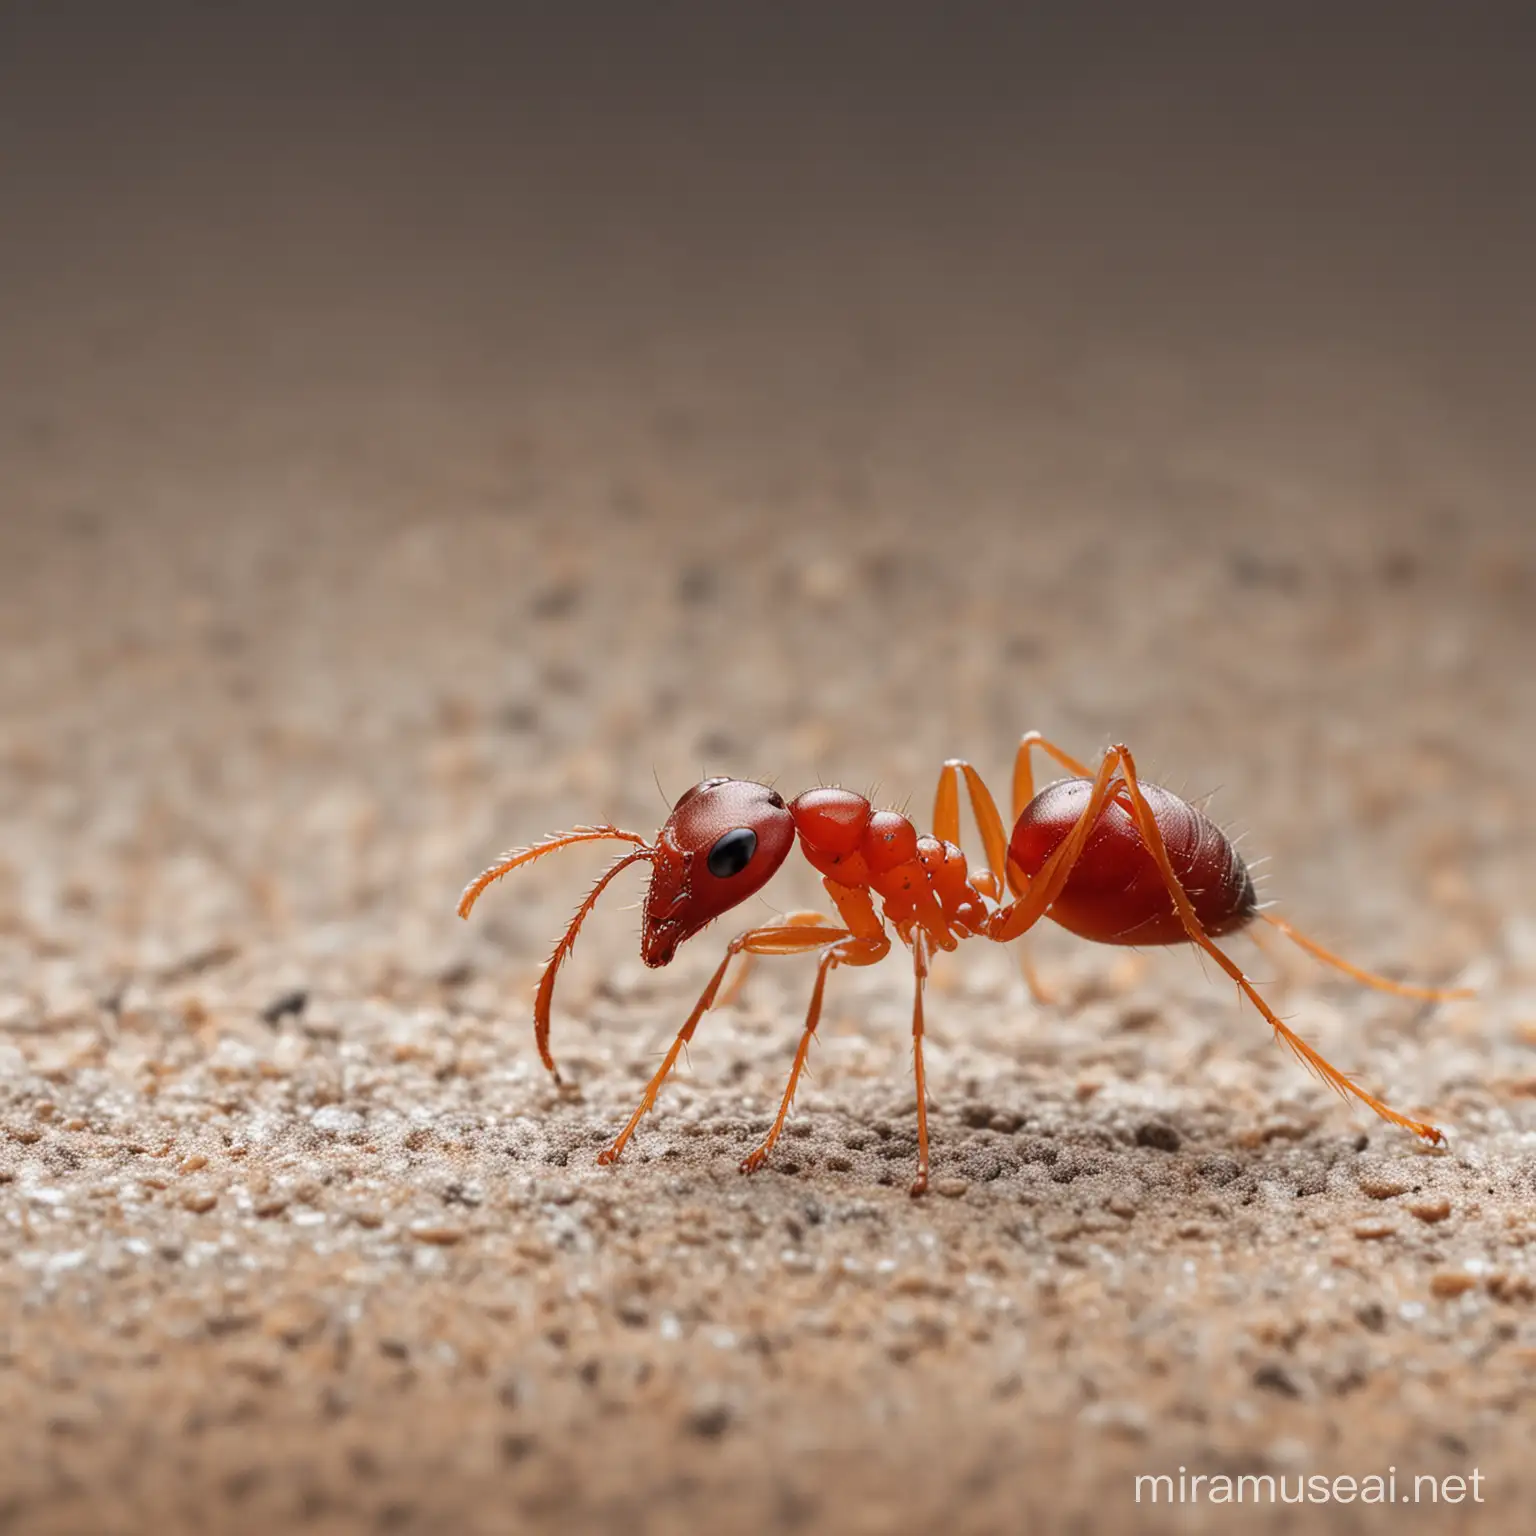 Macro Photography of a Red Ant at 30mm Lens